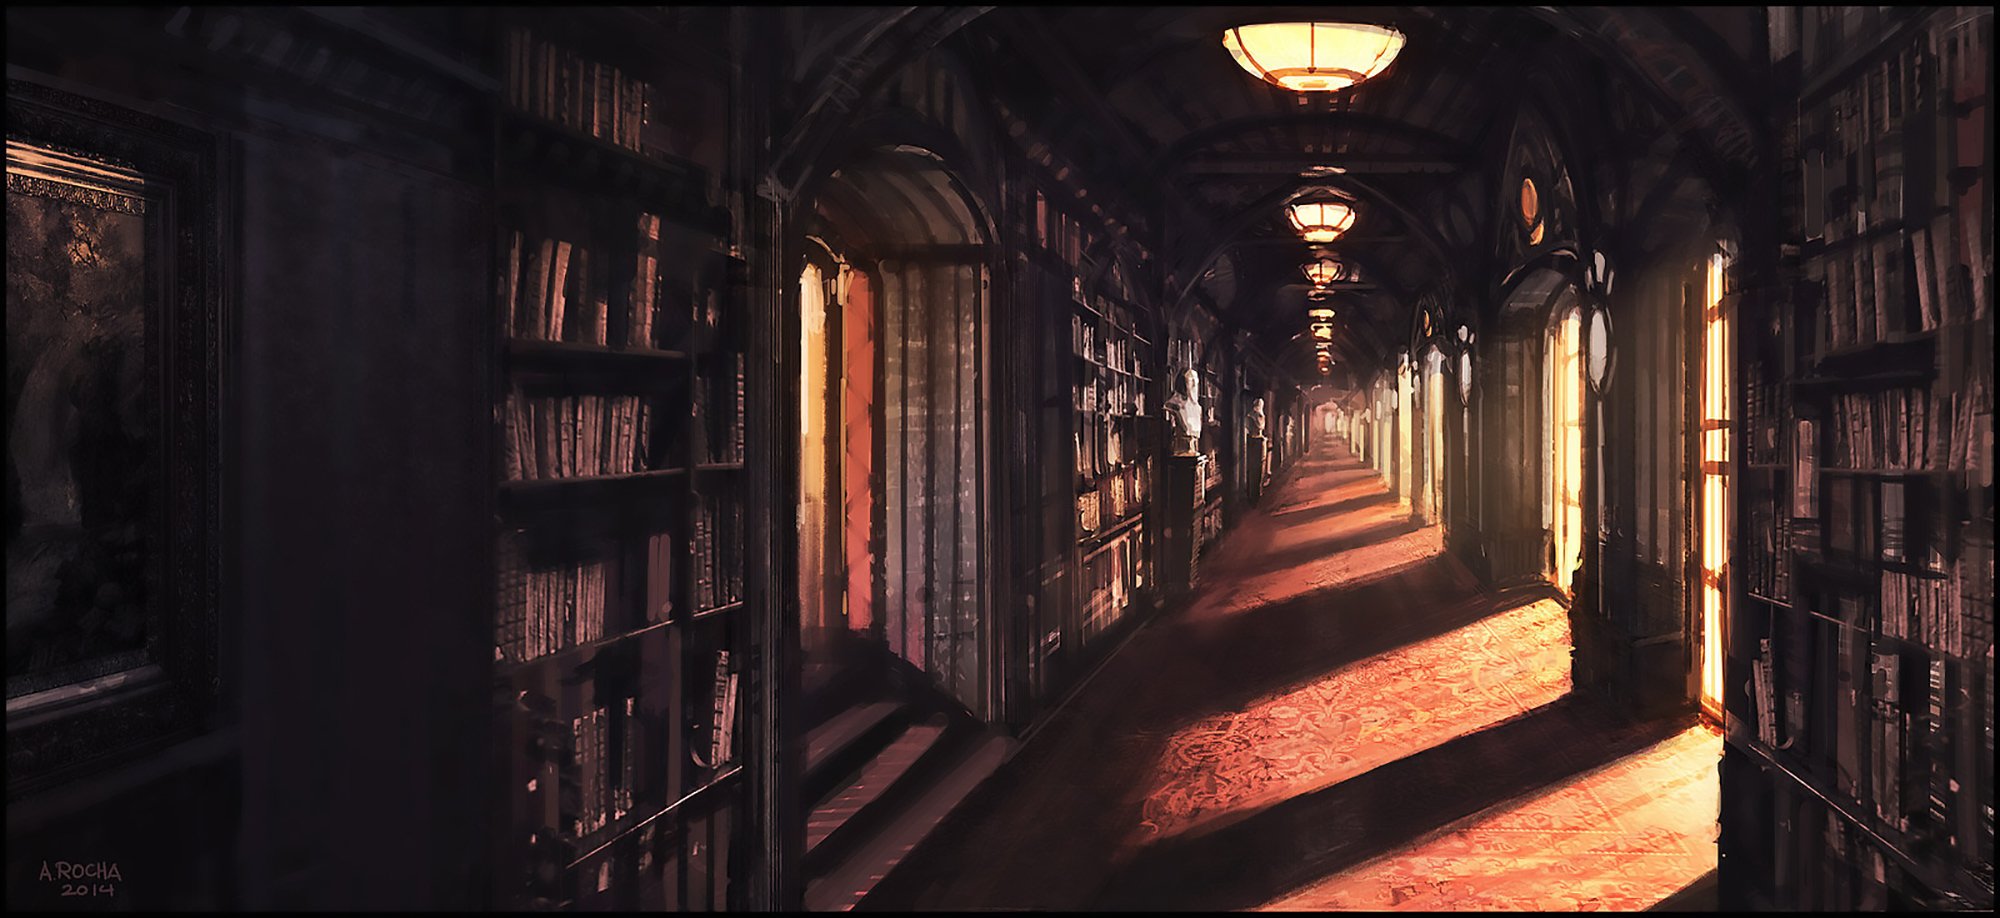 Fantasy Library Wallpaper and Background Imagex918